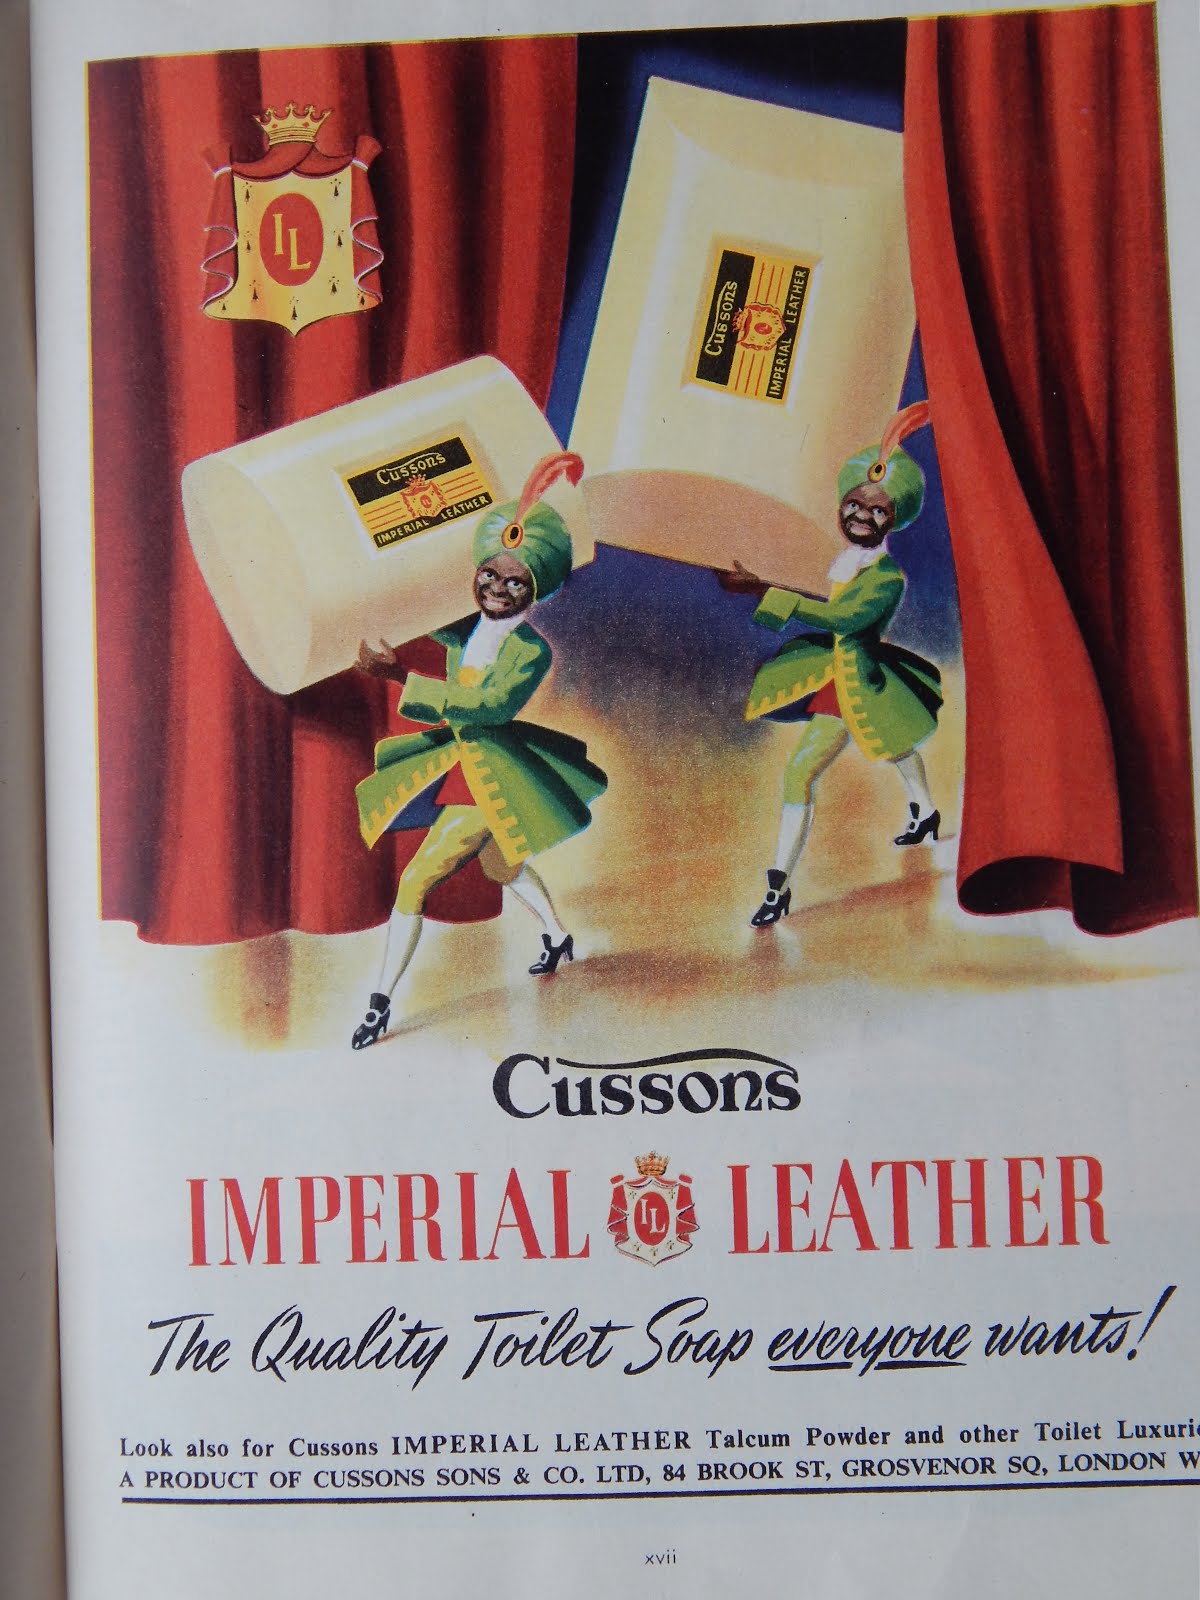 Every household had Imperial Leather